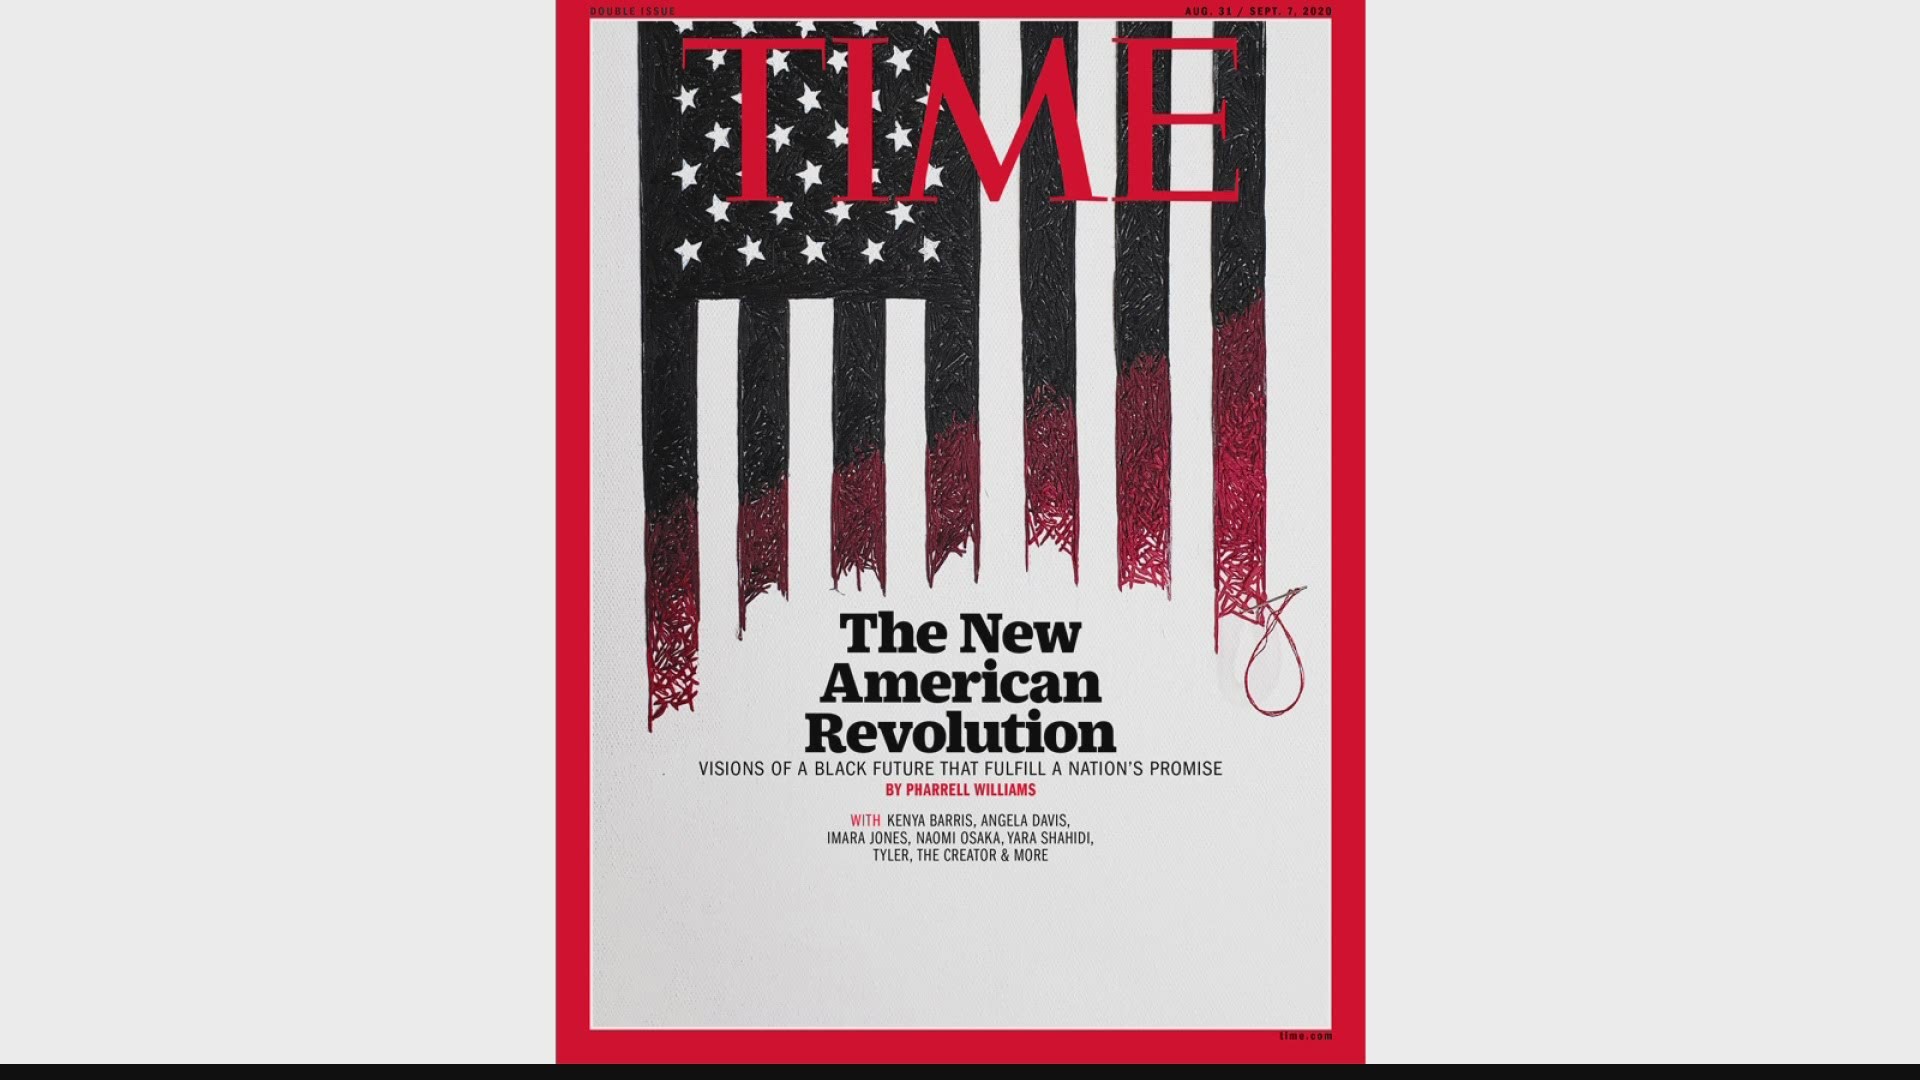 Nneka Jones is the artist behind the cover of the upcoming issue, "The New American Revolution," a series of essays about equality and racism in America.